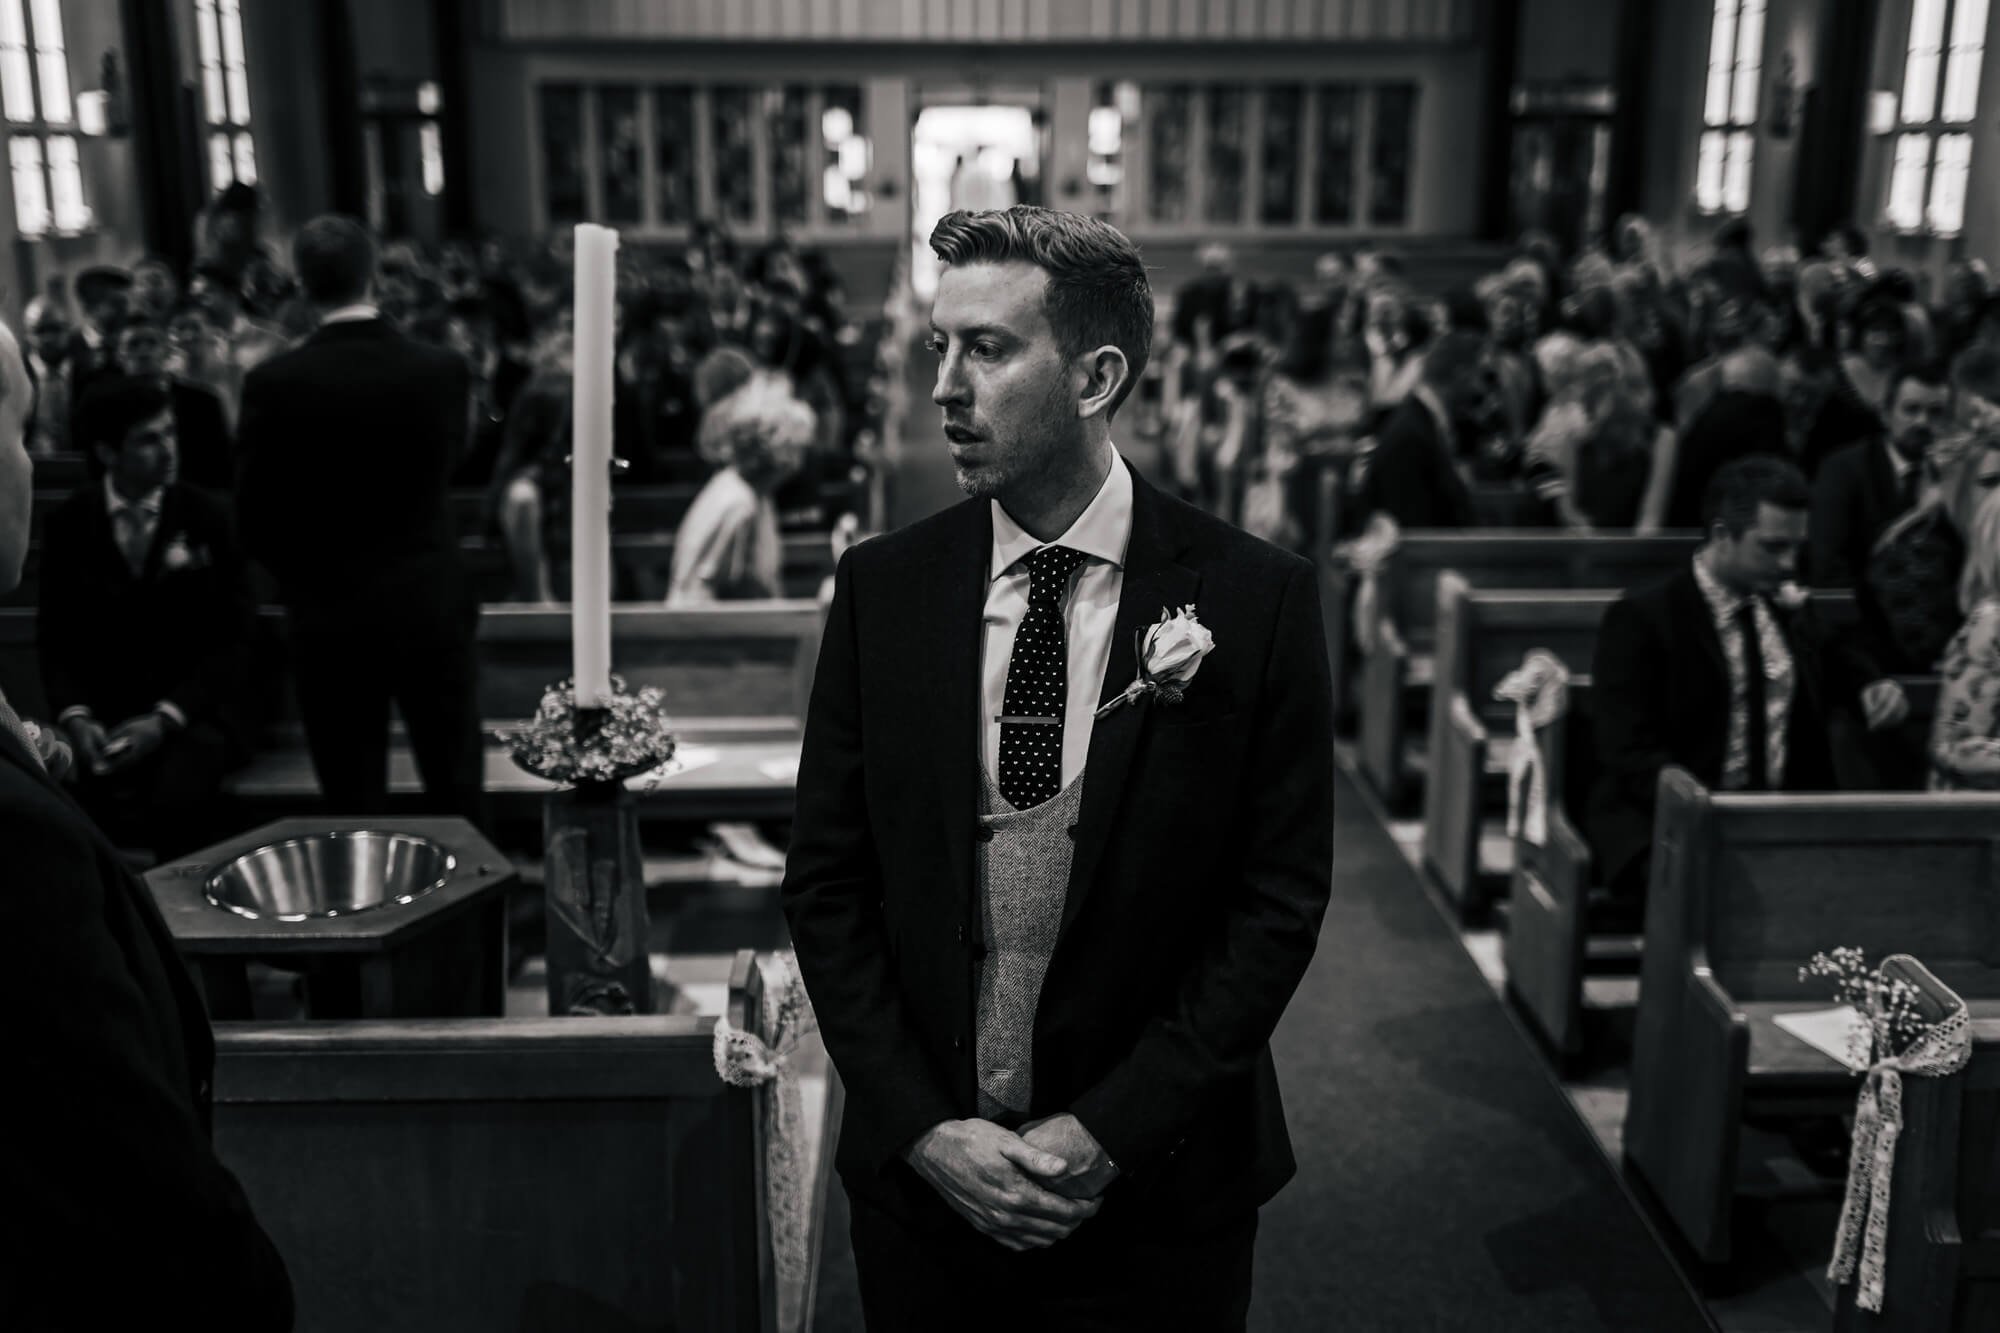 Groom nervously awaiting his bride at the church